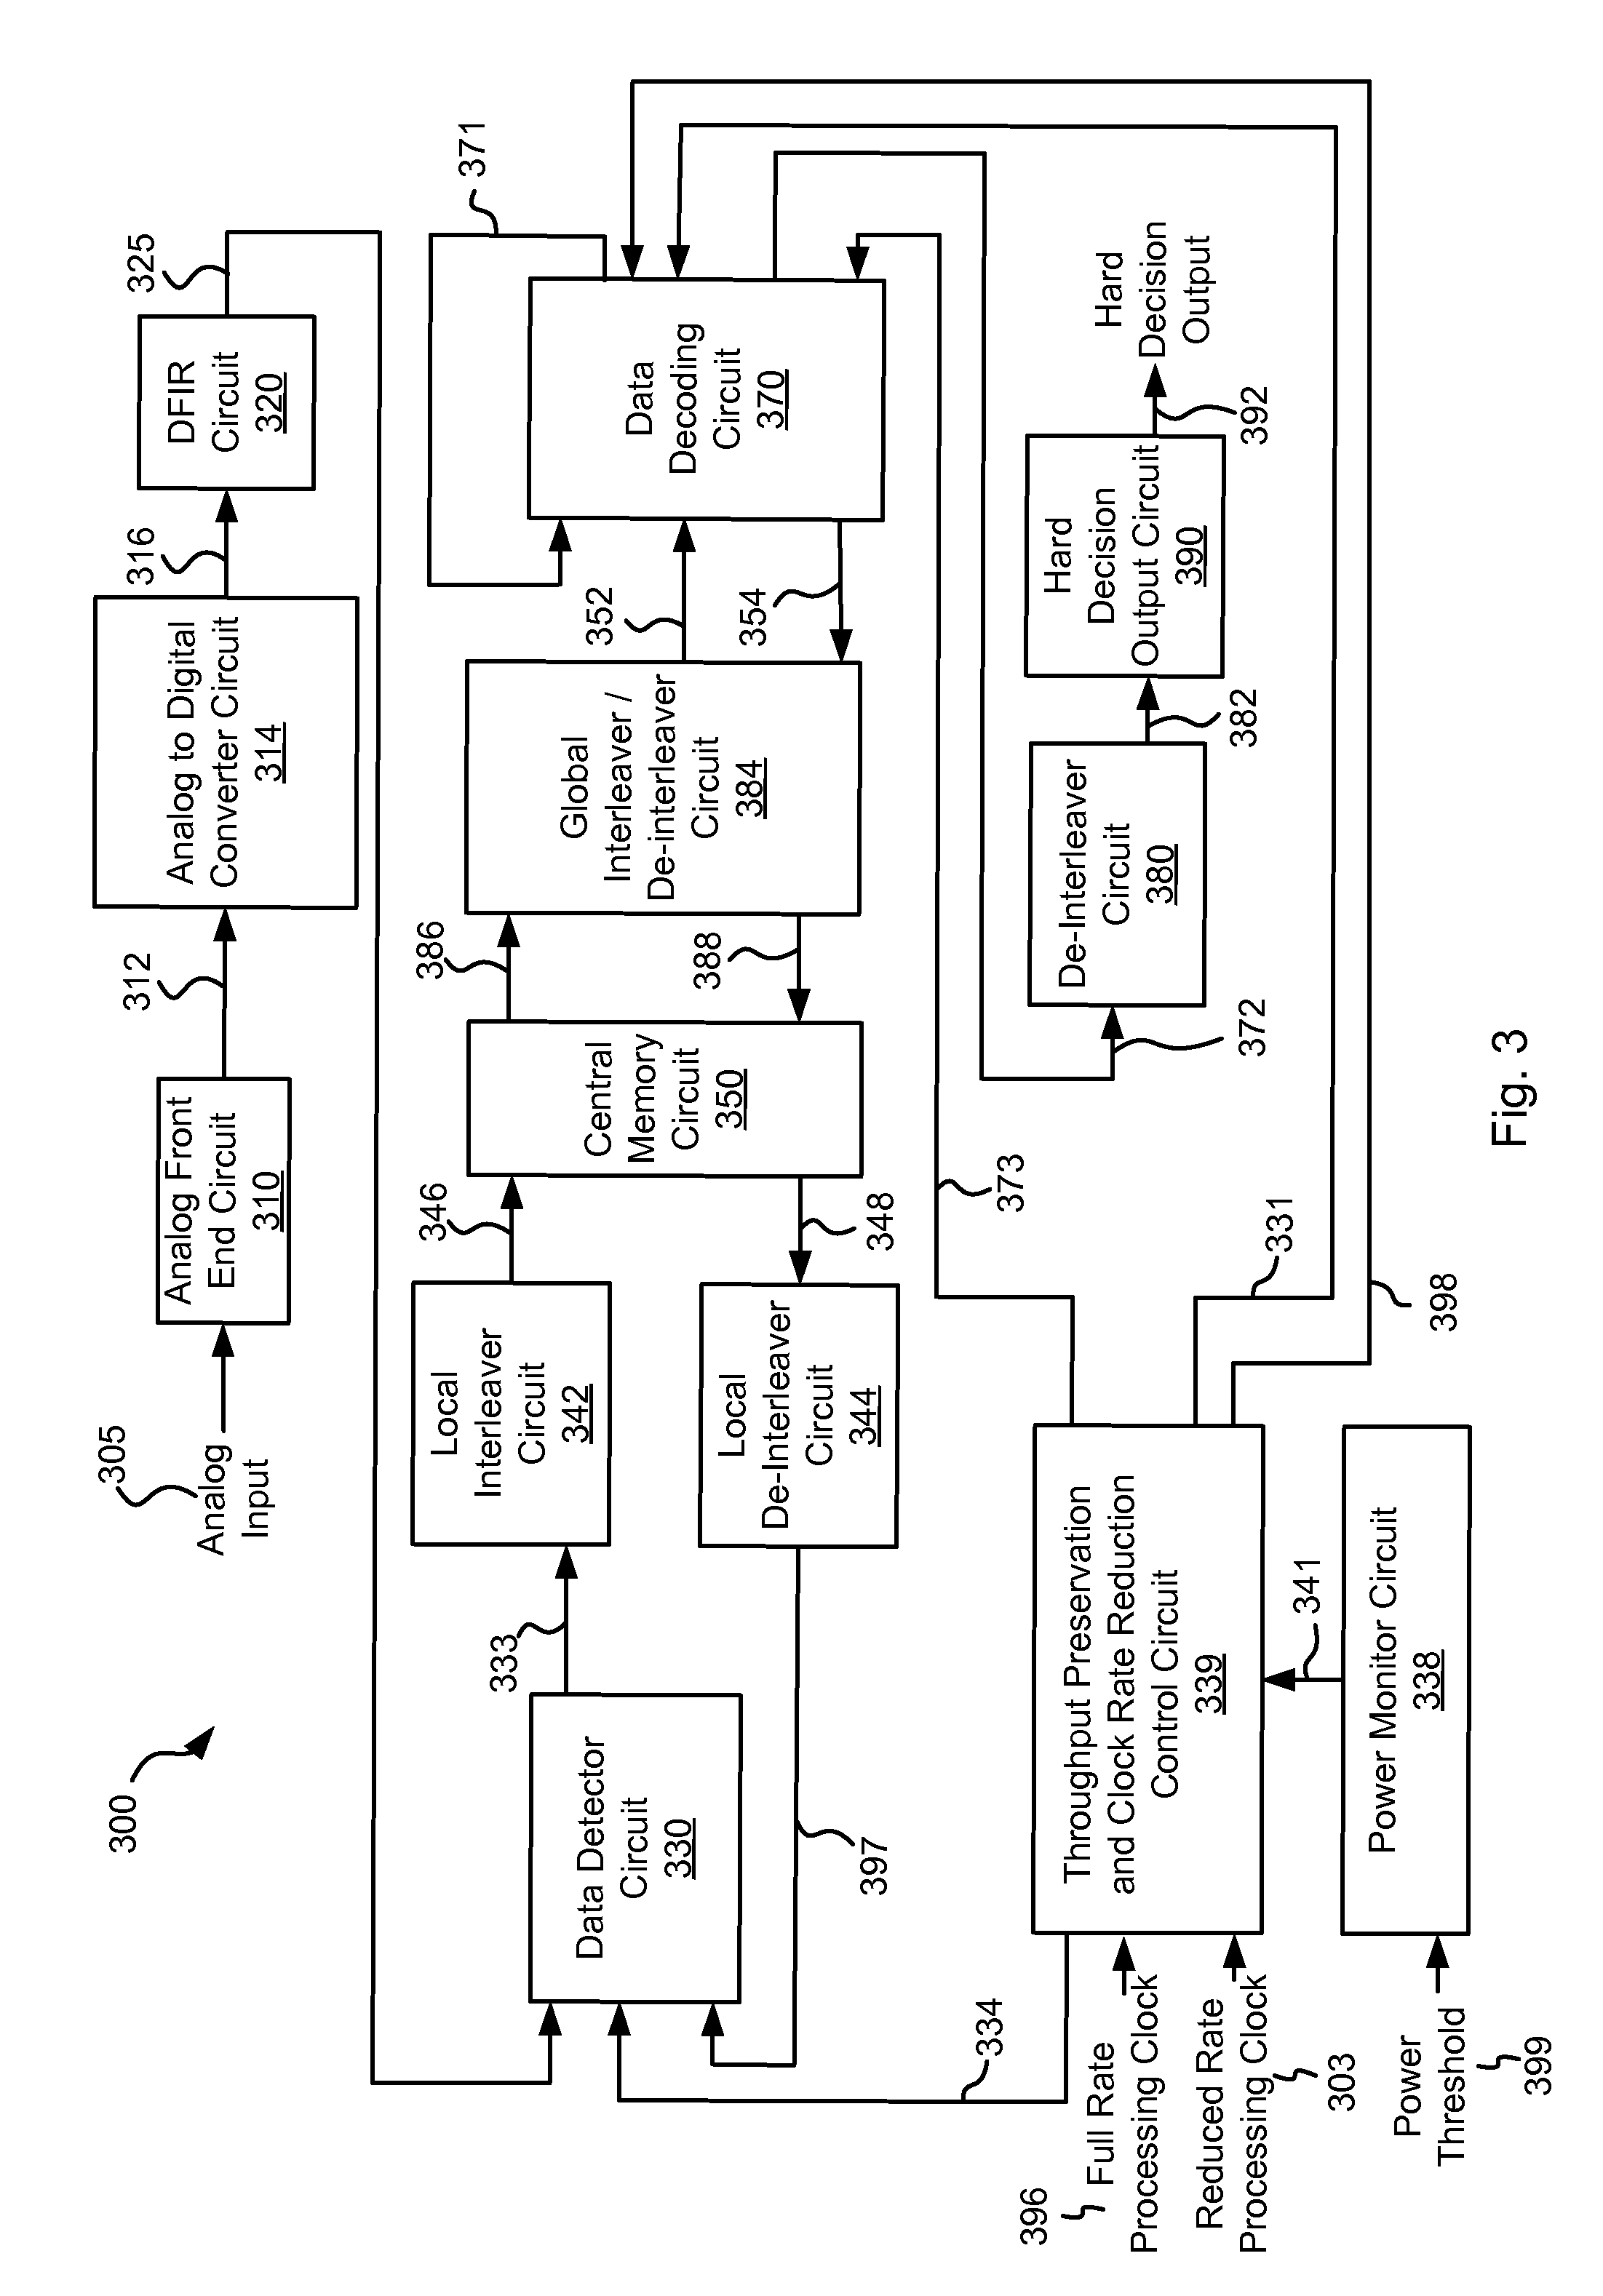 Systems and Methods for Power Governance in a Data Processing Circuit